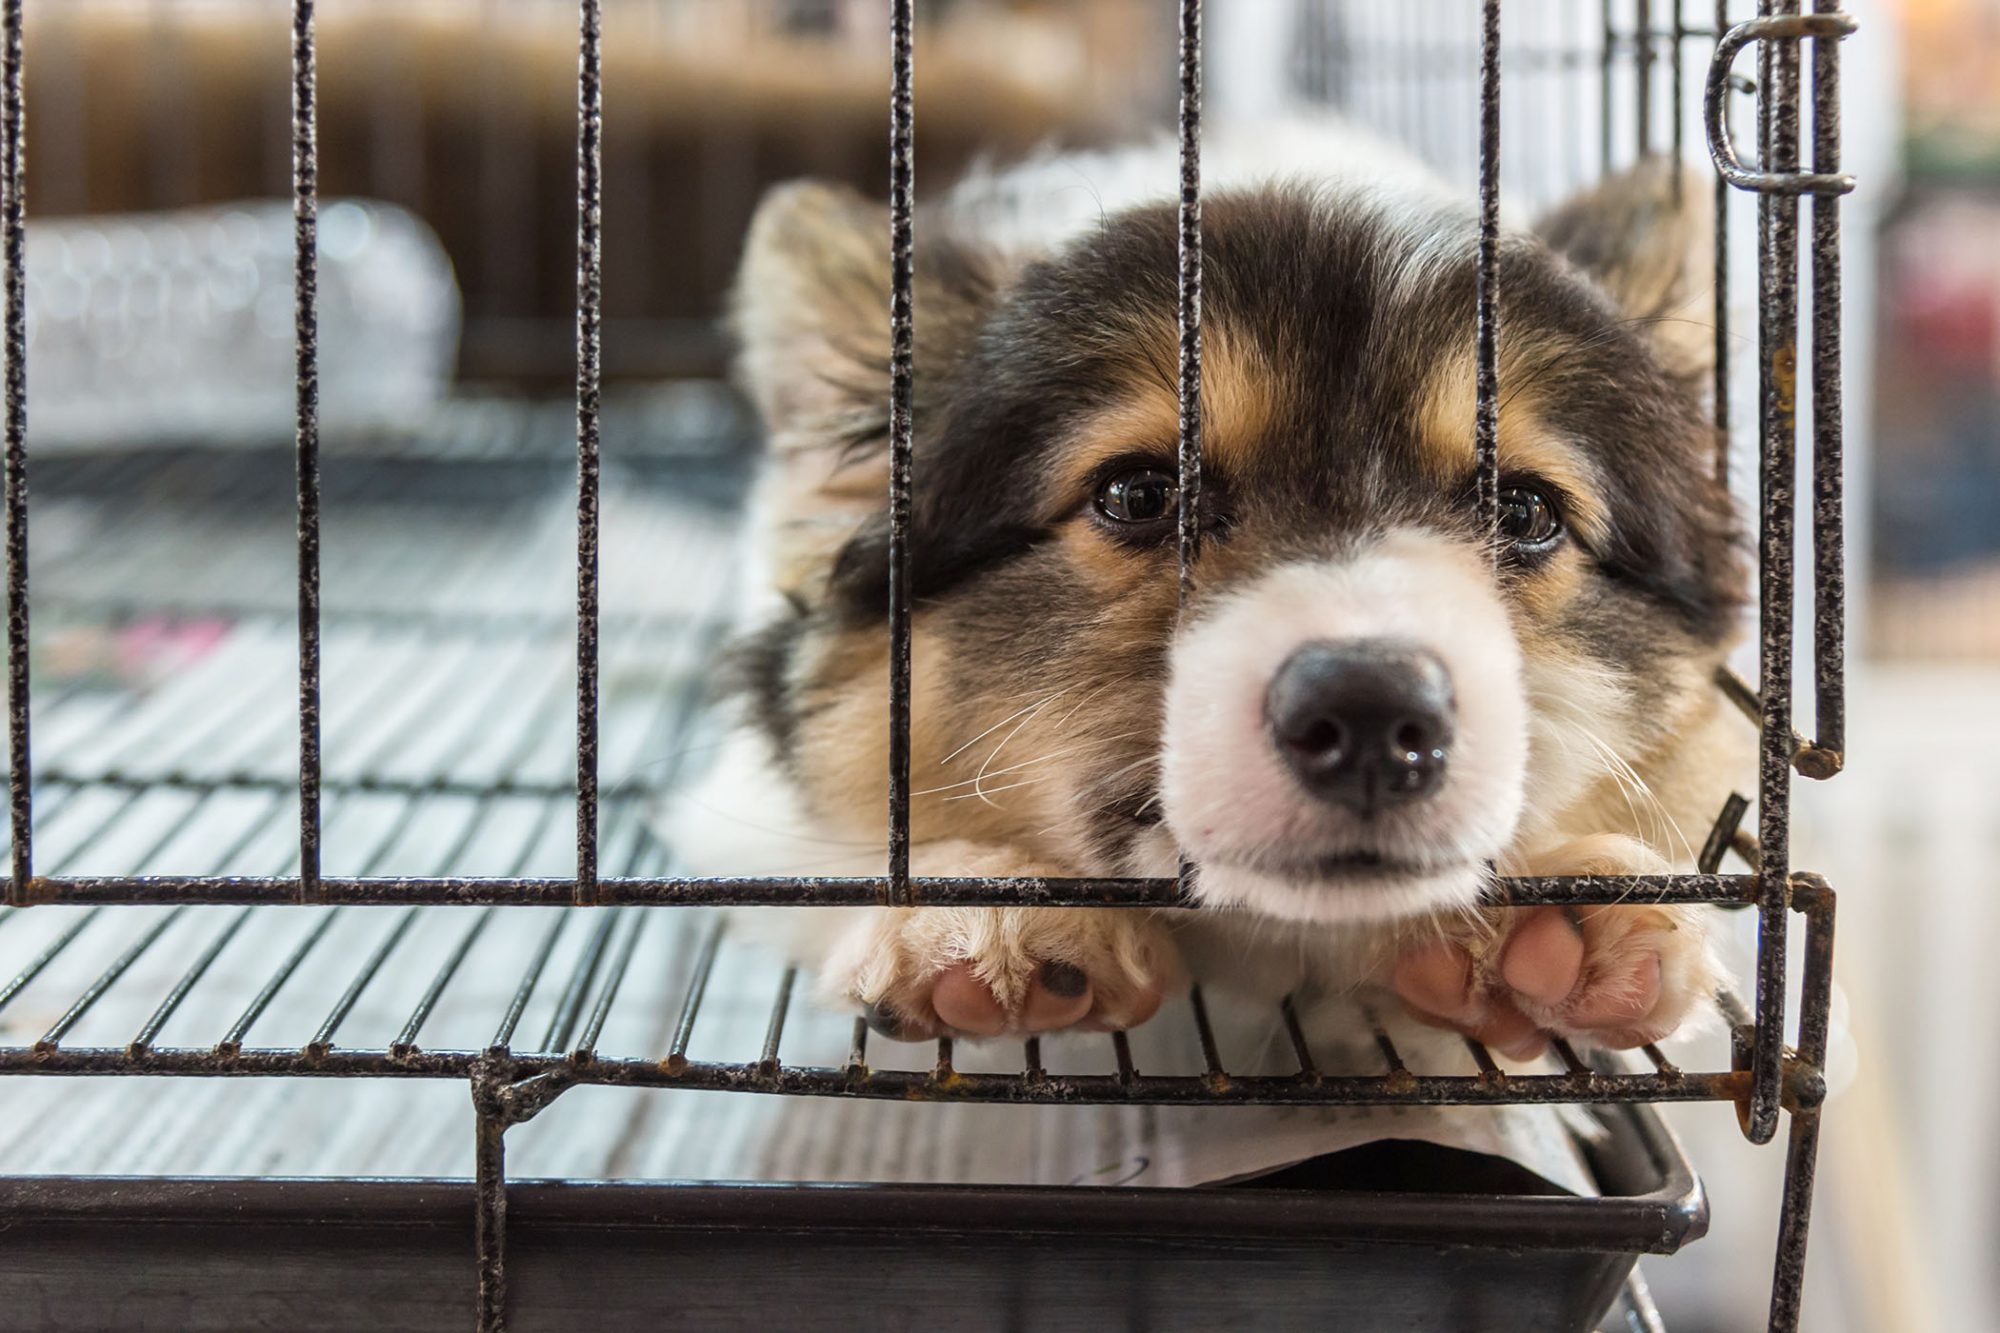 New York State Bans Pet Stores From Selling Dogs, Cats, Rabbits